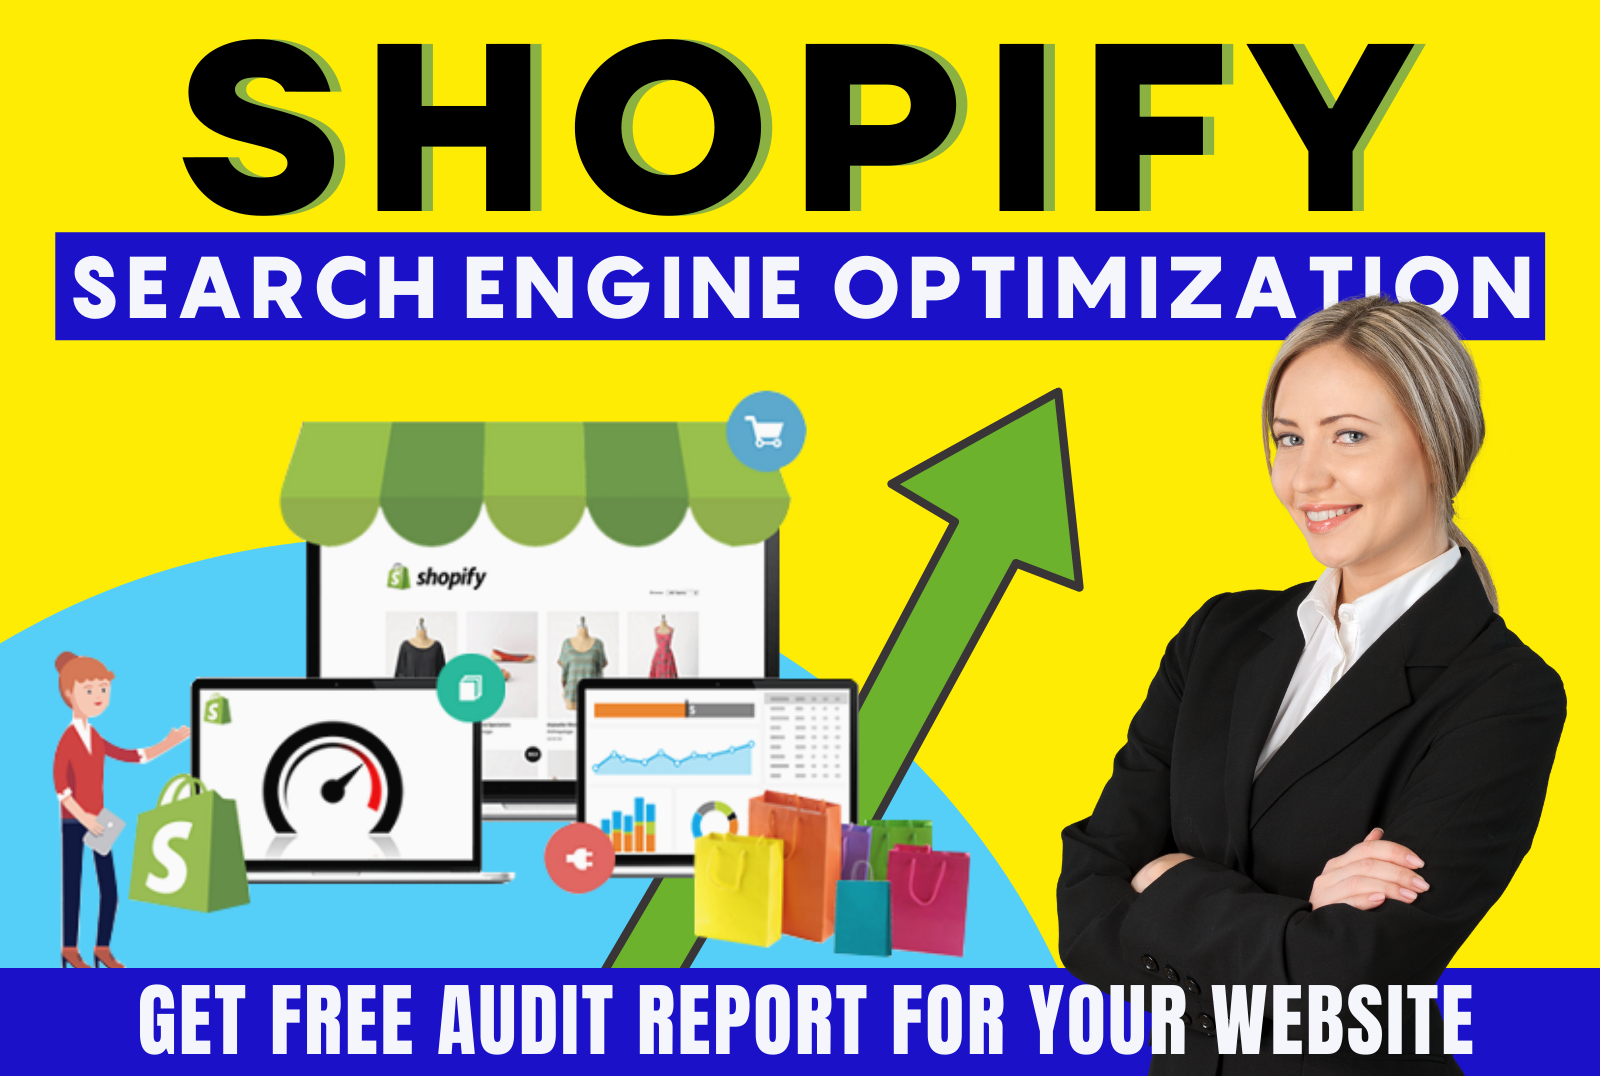 I will be your shopify seo expert to do perfect shopify seo and boost shopify sales and ranking